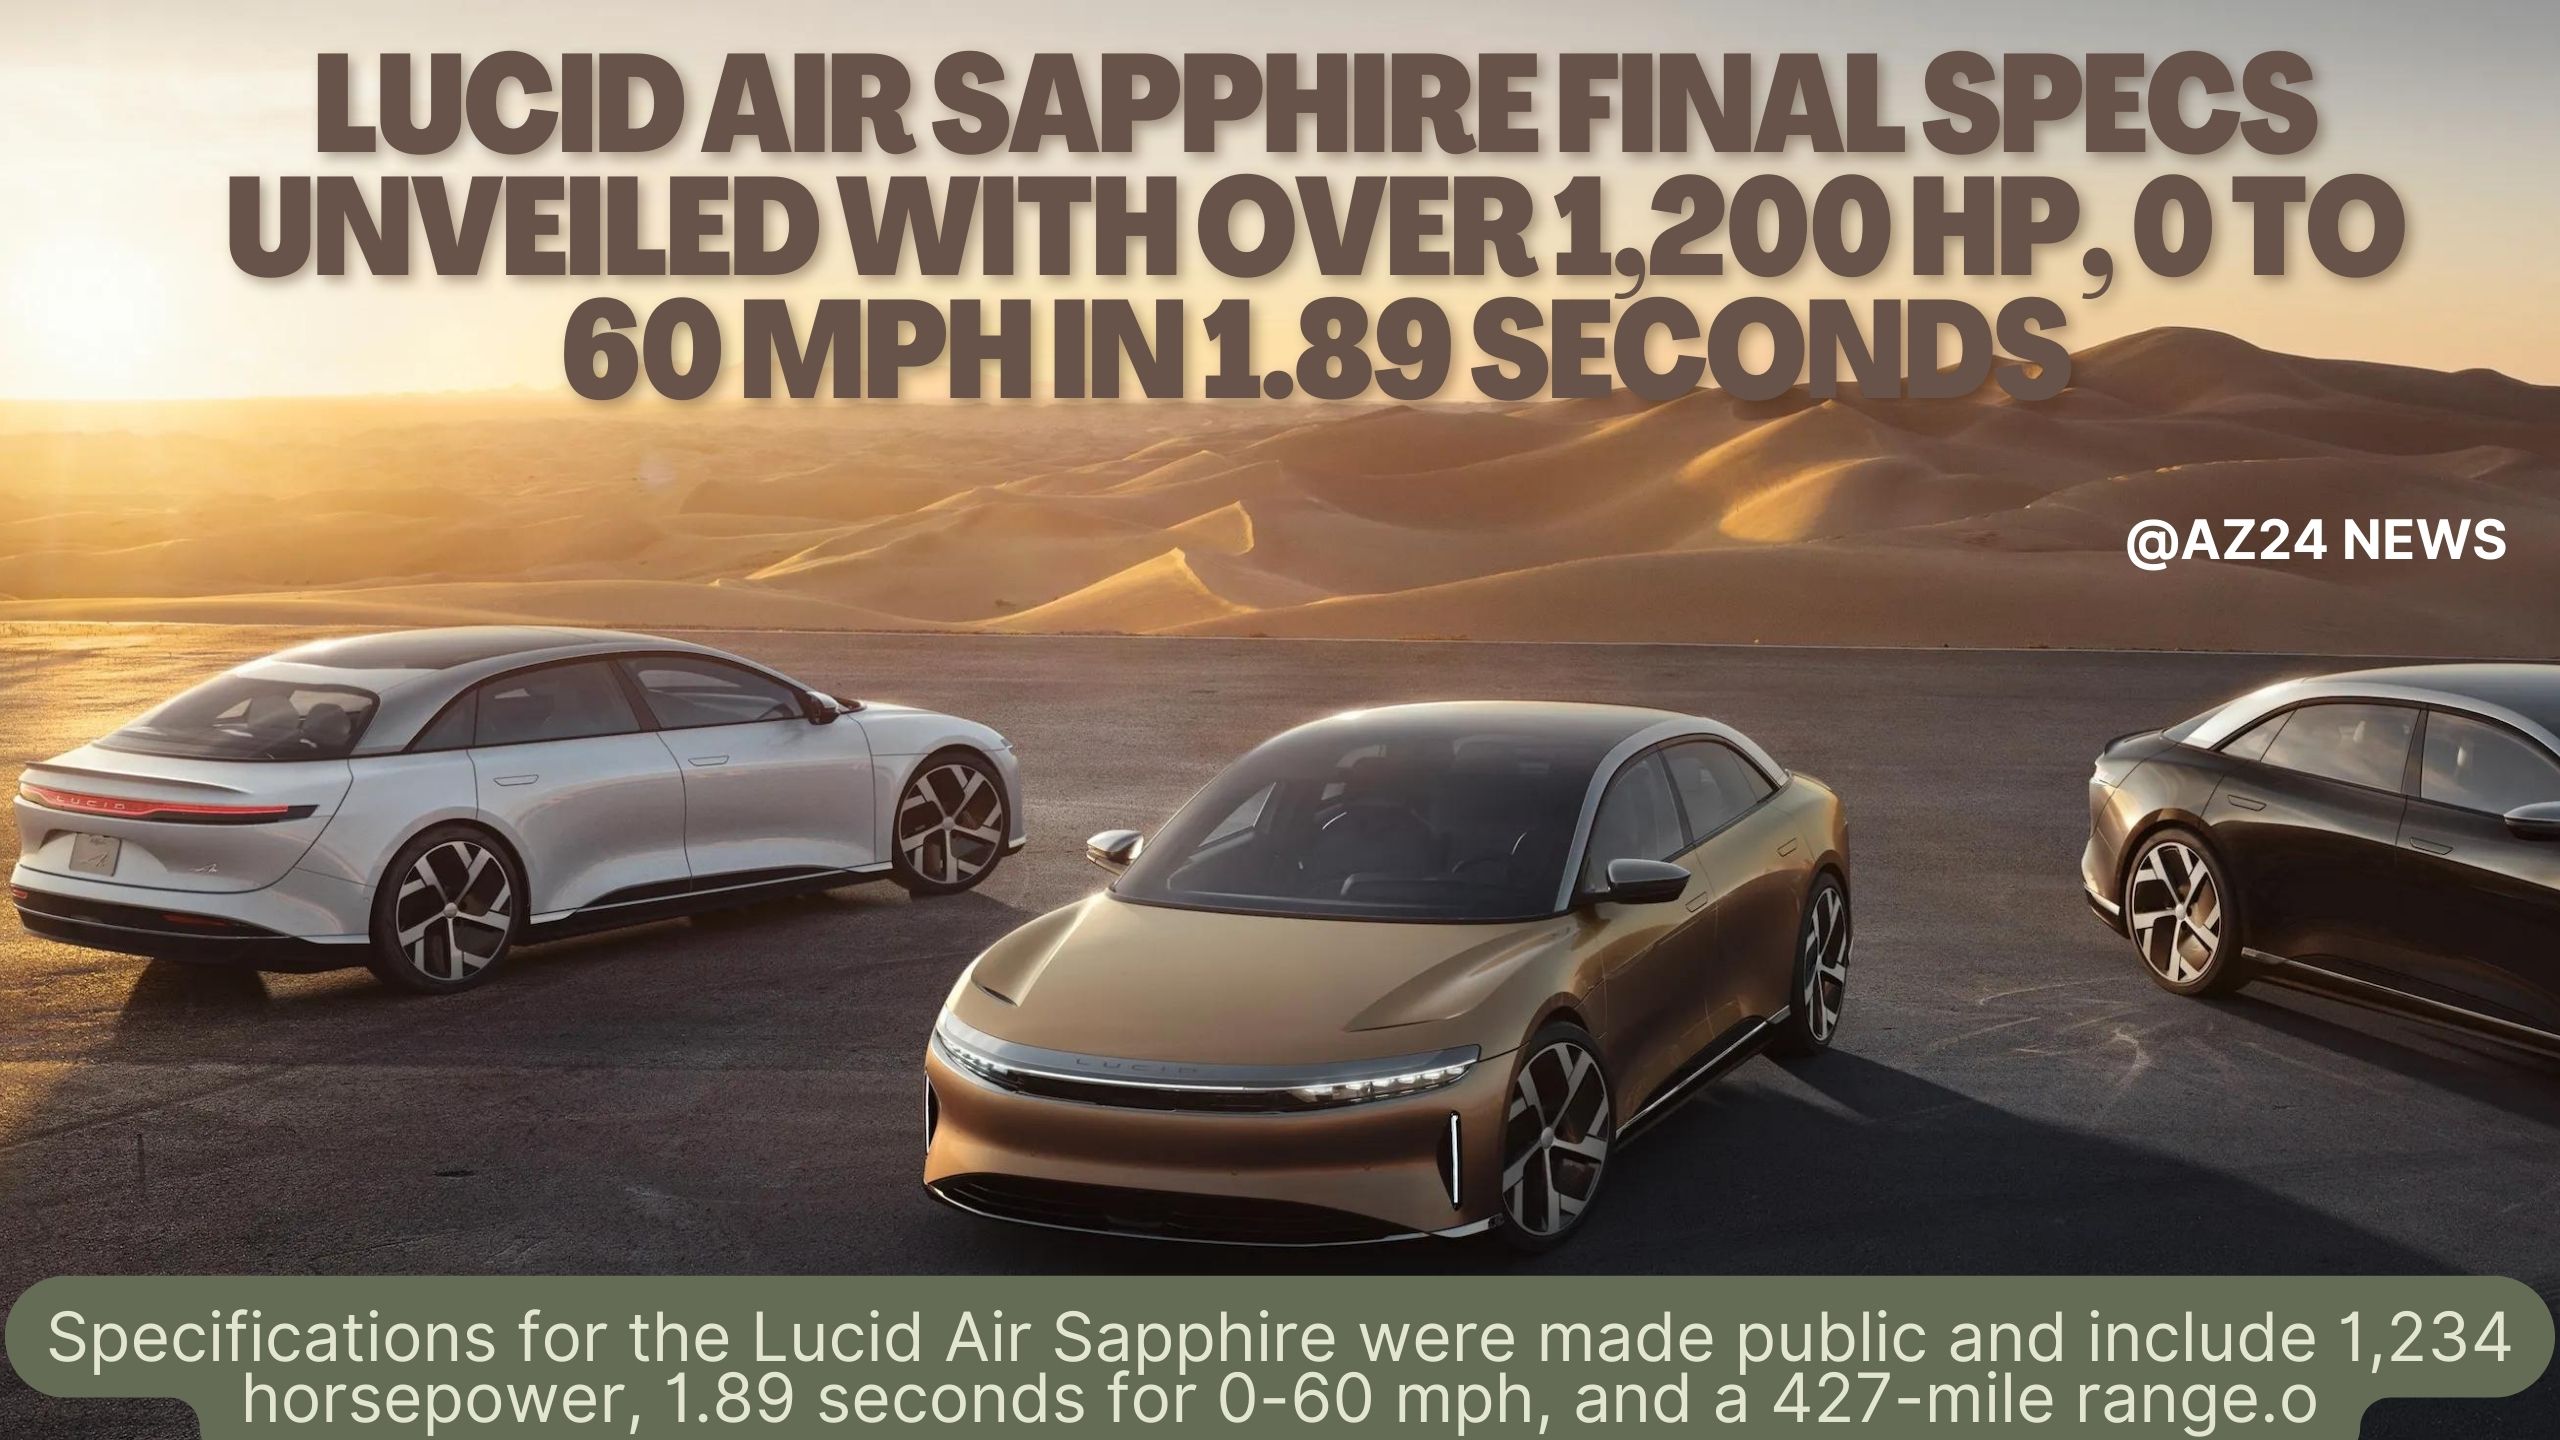 Lucid Air Sapphire final specs unveiled with over 1,200 hp, 0 to 60 mph in 1.89 seconds